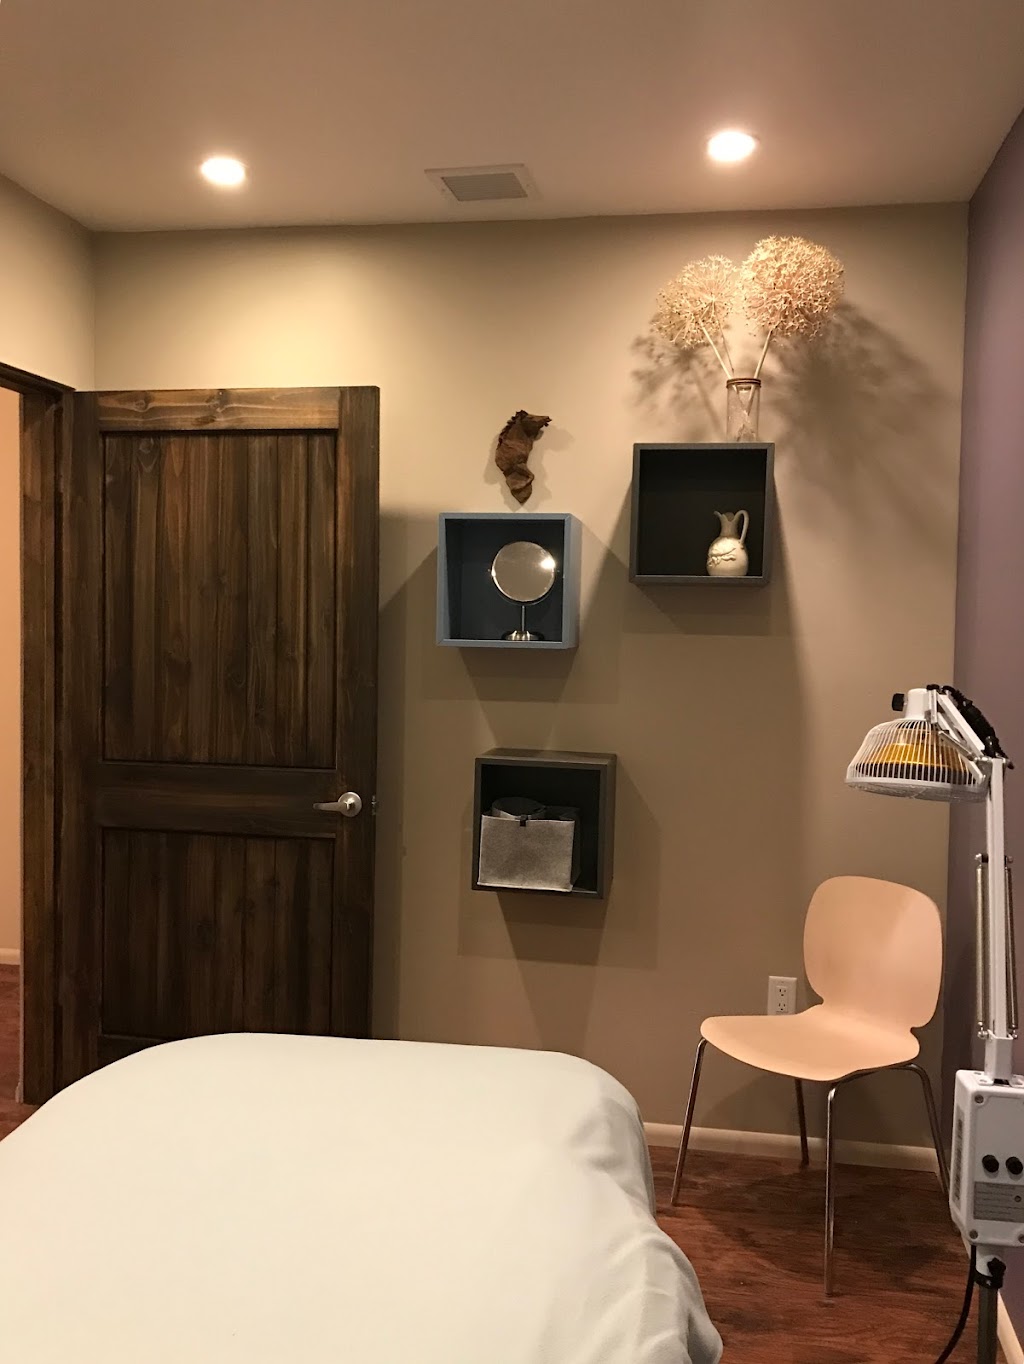 Golden West Acupuncture and Wellness LLC. | 590 Bosque Farms Blvd, Bosque Farms, NM 87068, USA | Phone: (505) 869-9283